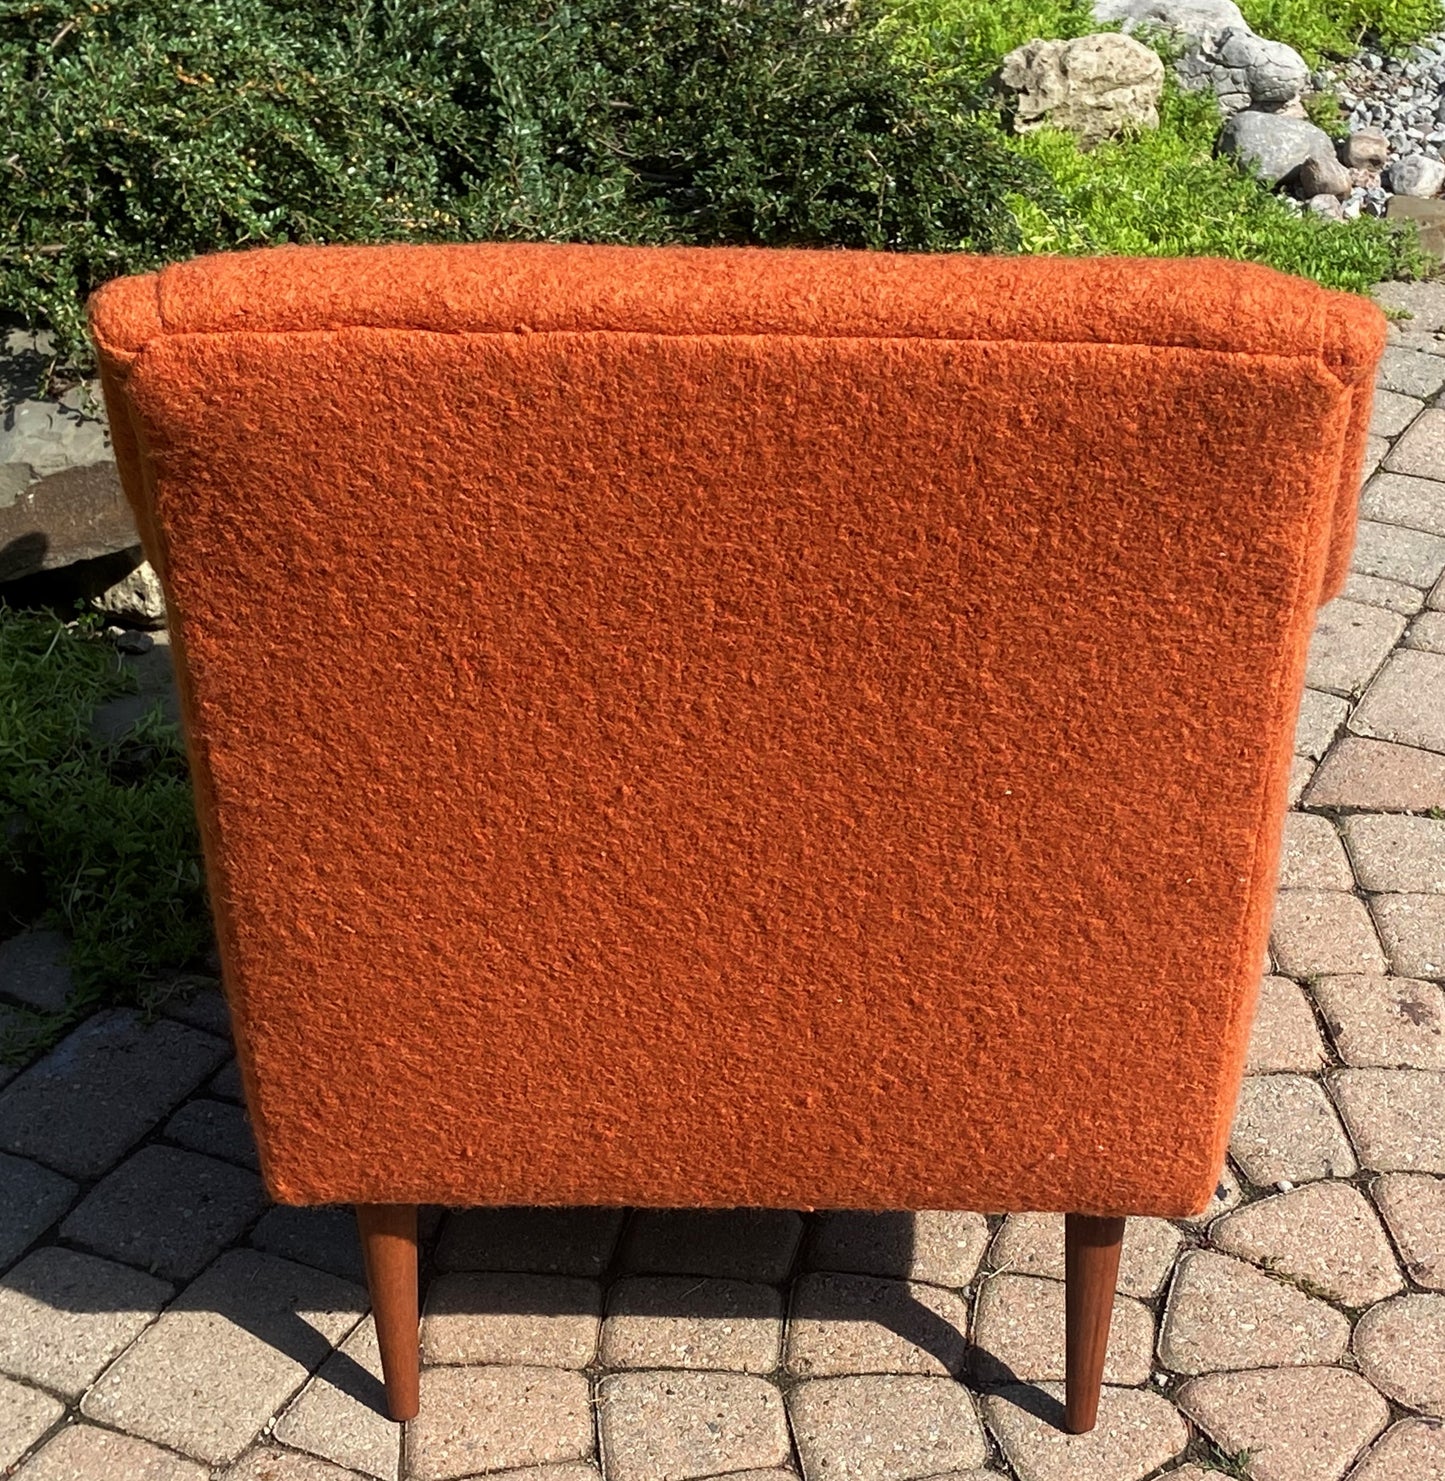 REFINISHED REUPHOLSTERED Mid Century Modern Armchair